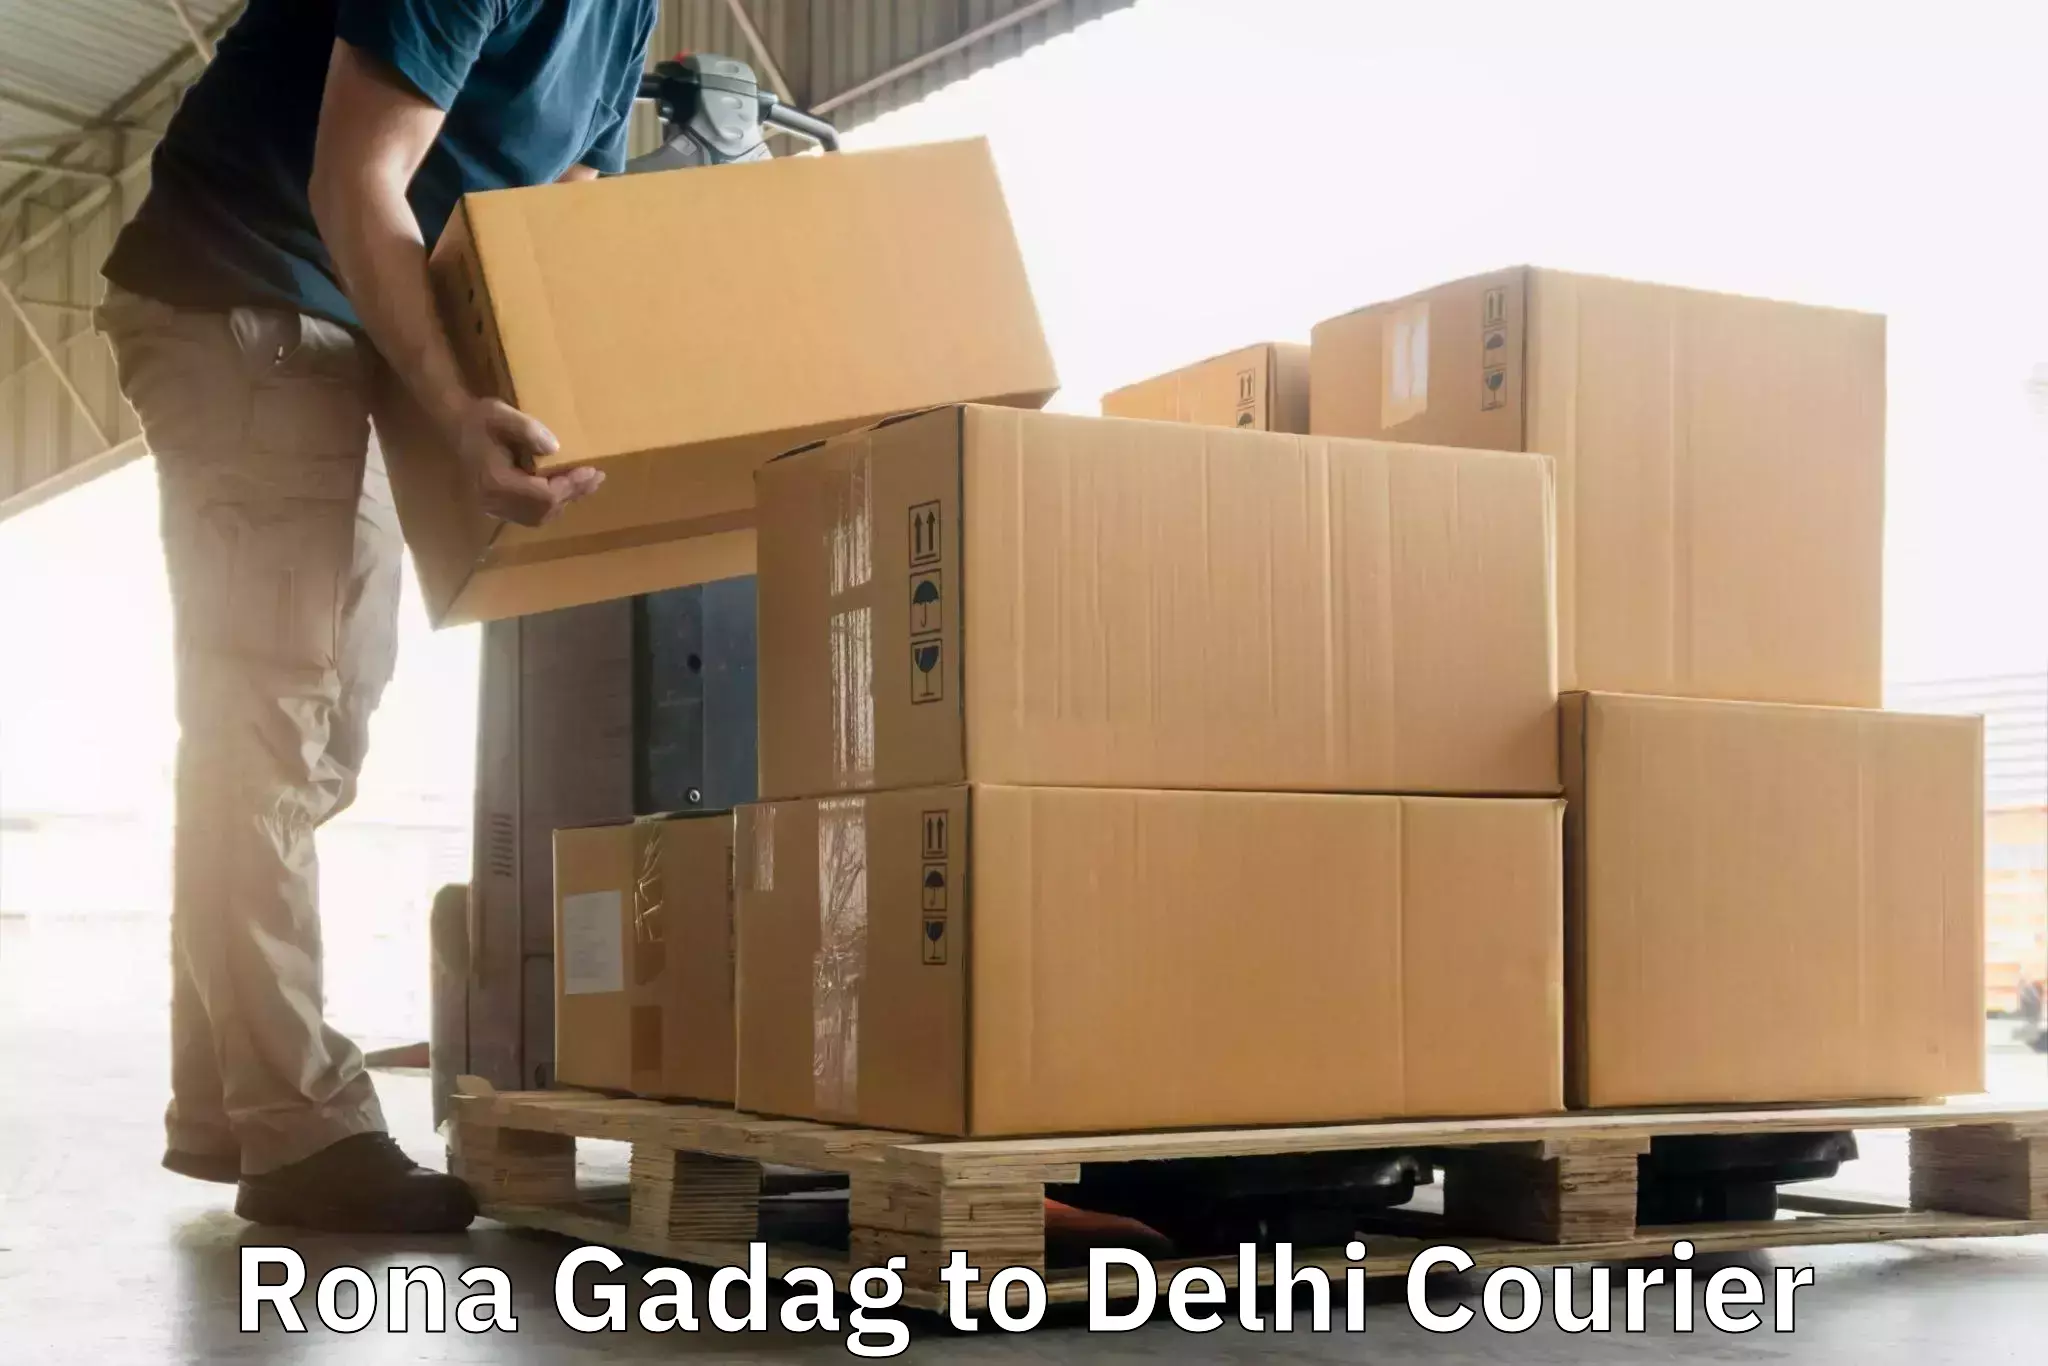 Parcel service for businesses Rona Gadag to NCR